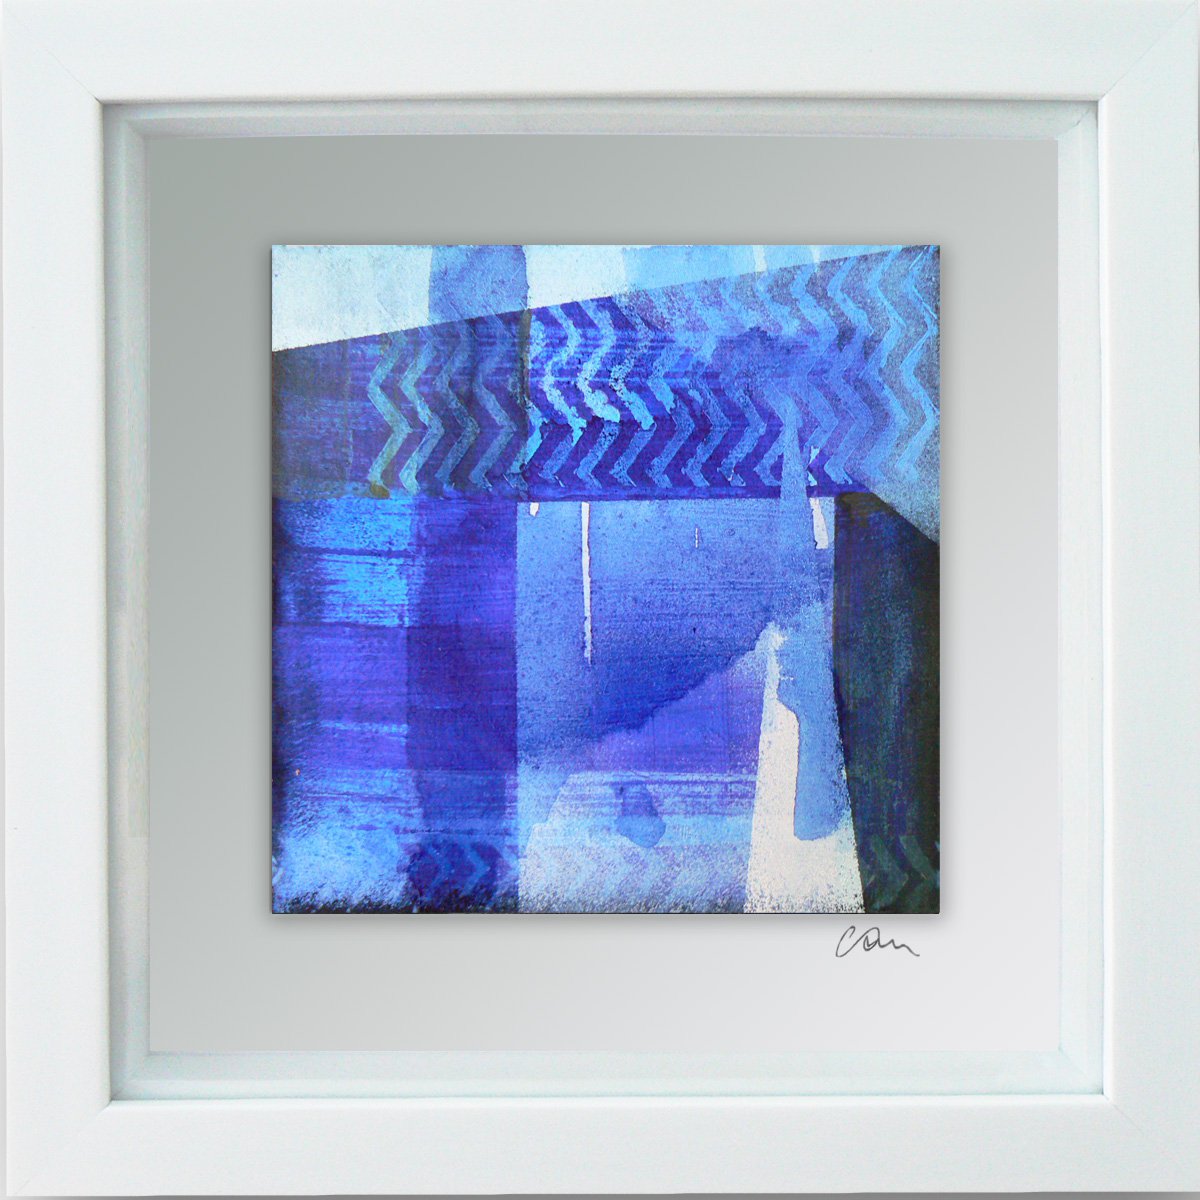 Framed ready to hang original abstract - Cahier #9 by Carolynne Coulson